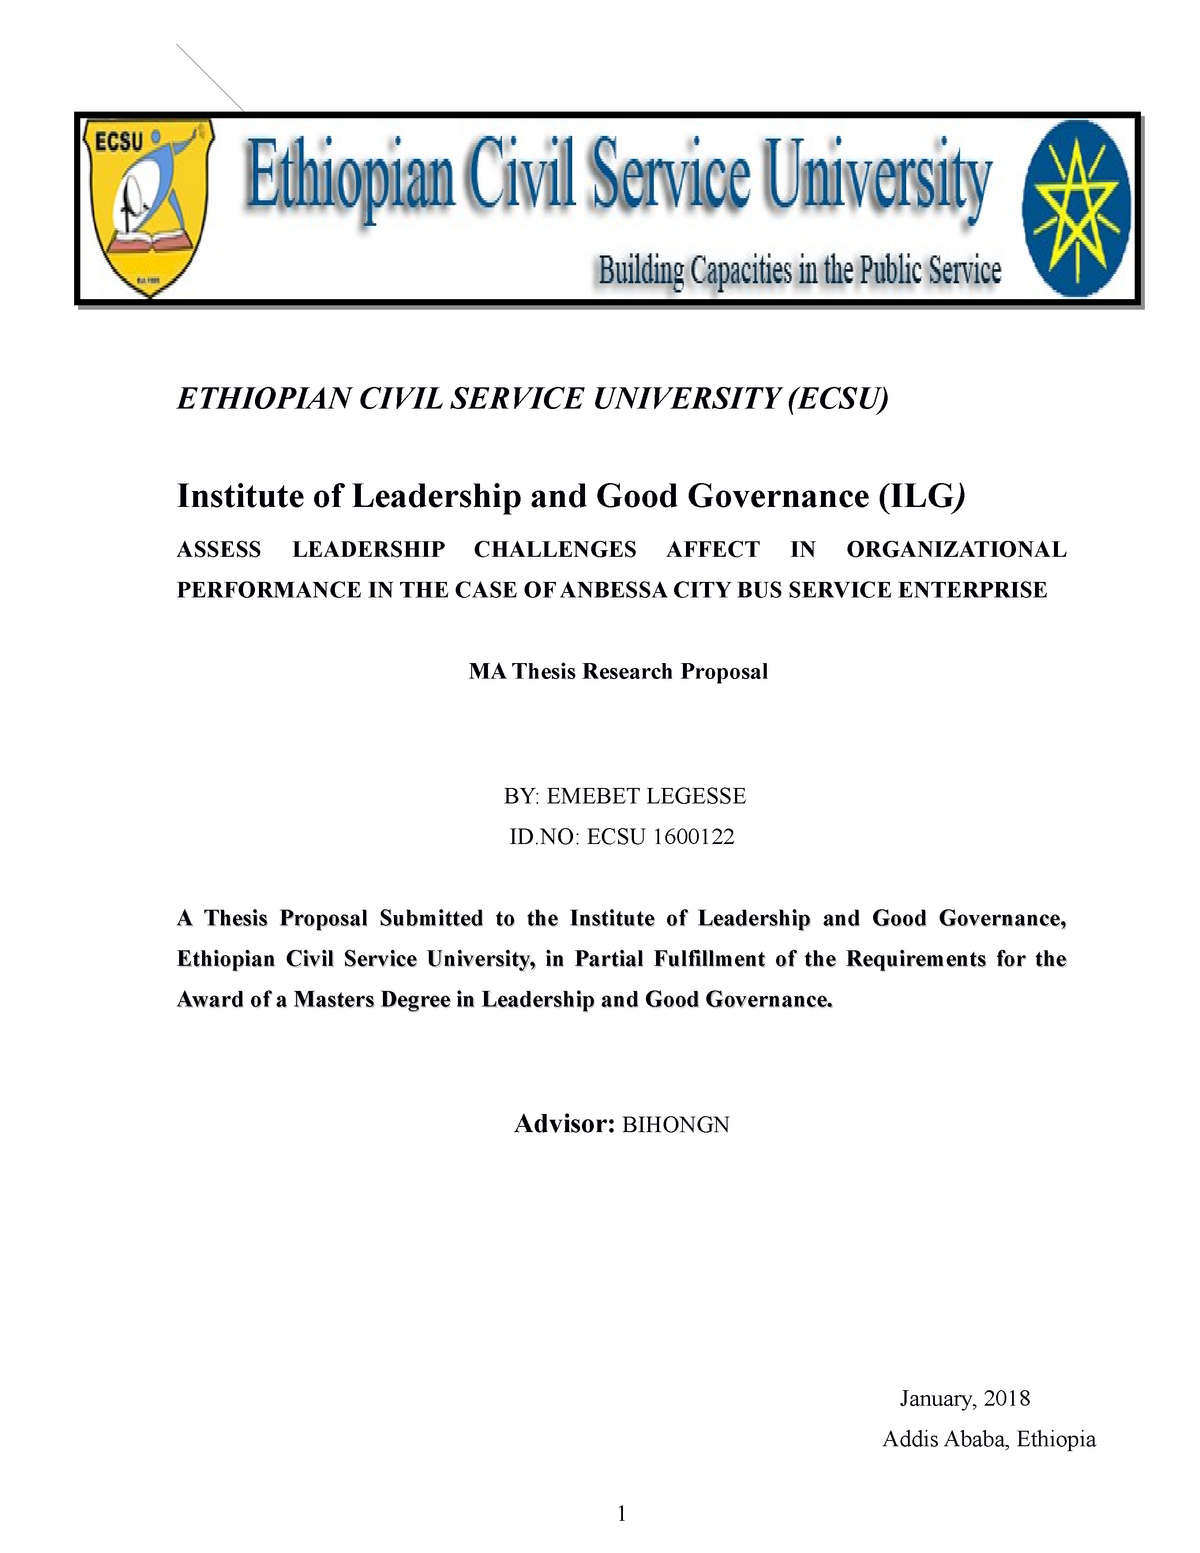 research proposal on leadership in ethiopia